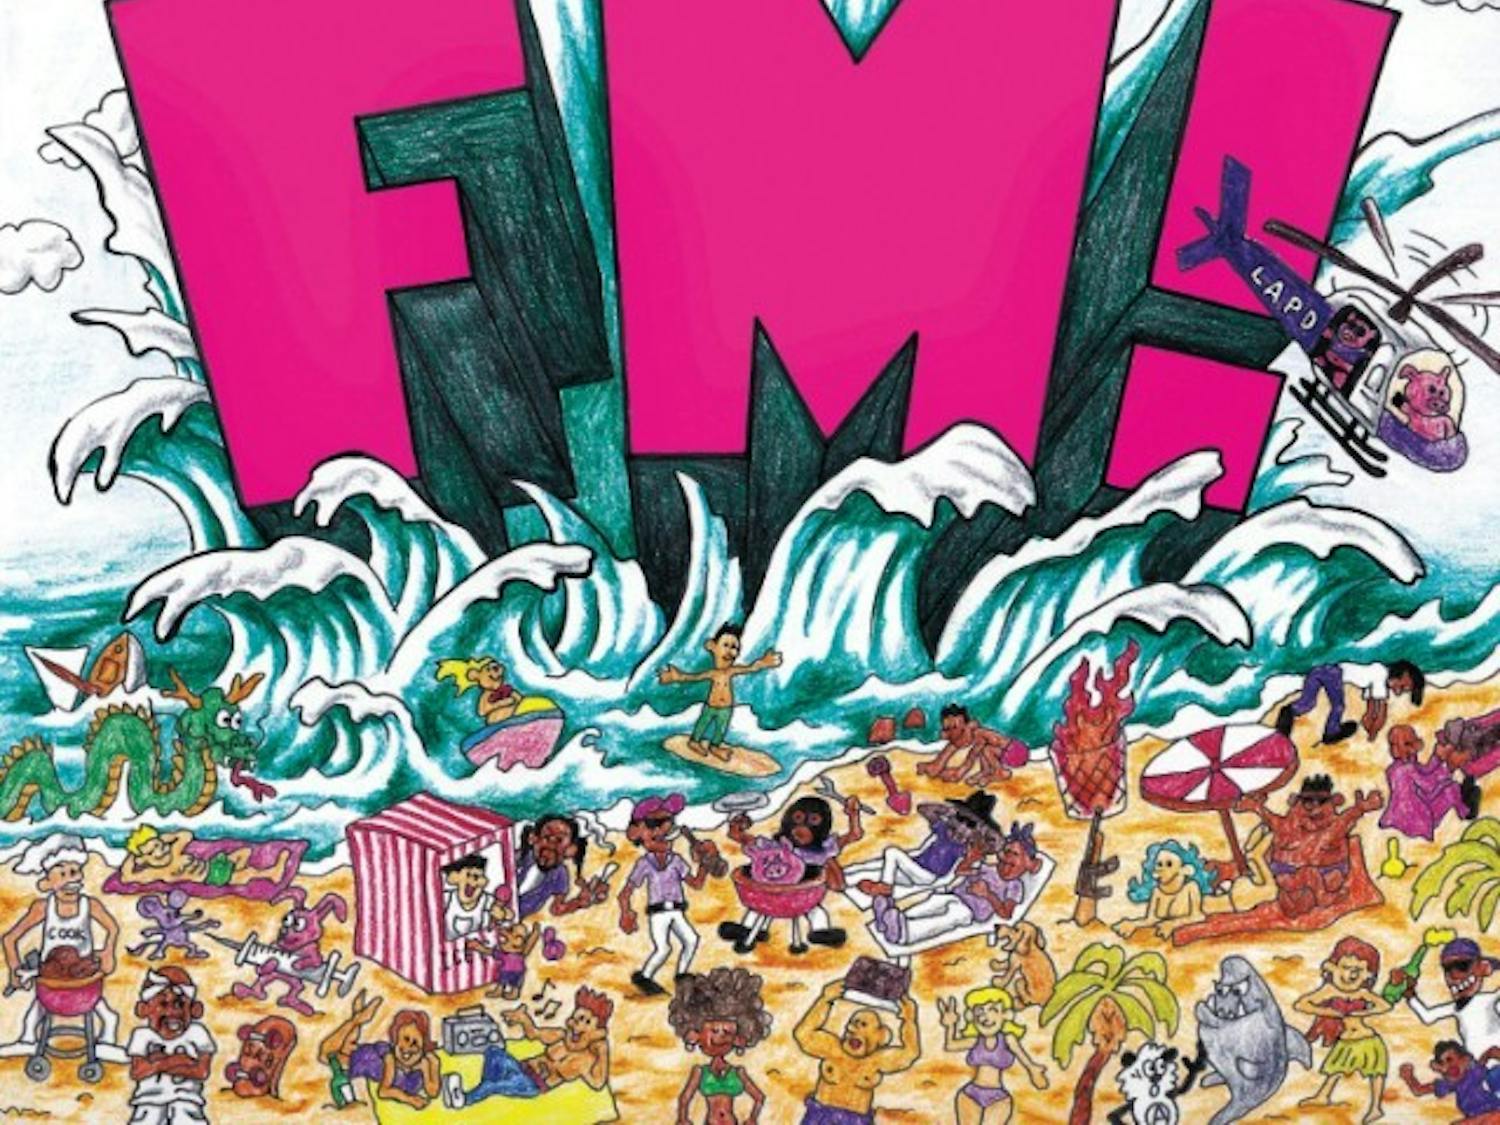 With a 22-minute runtime,&nbsp;FM! is engrossed in the moment as Staples takes in and reflects the world around him.